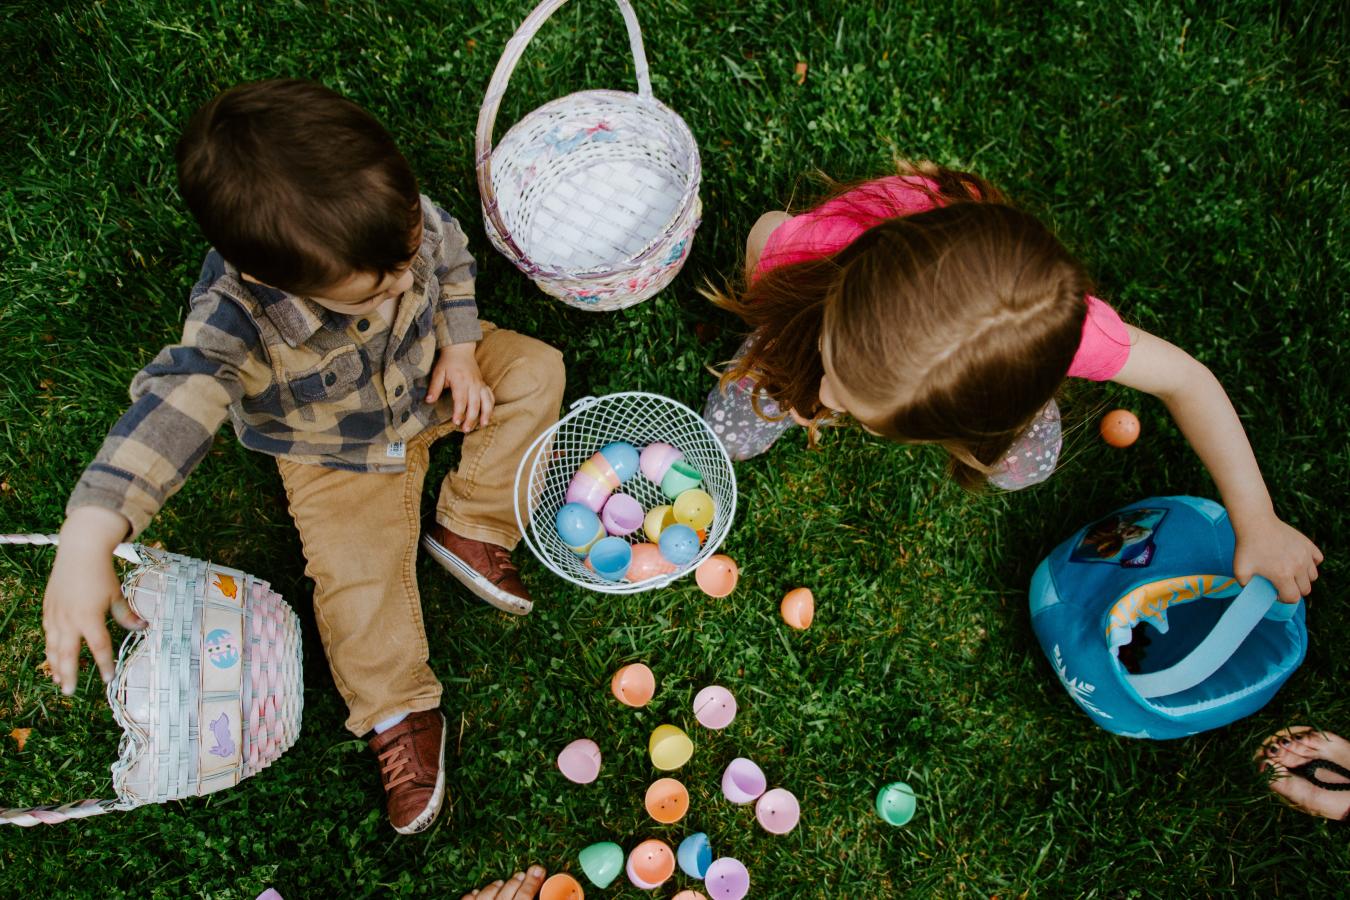 Children sitting on grass with their Easter baskets and eggs.